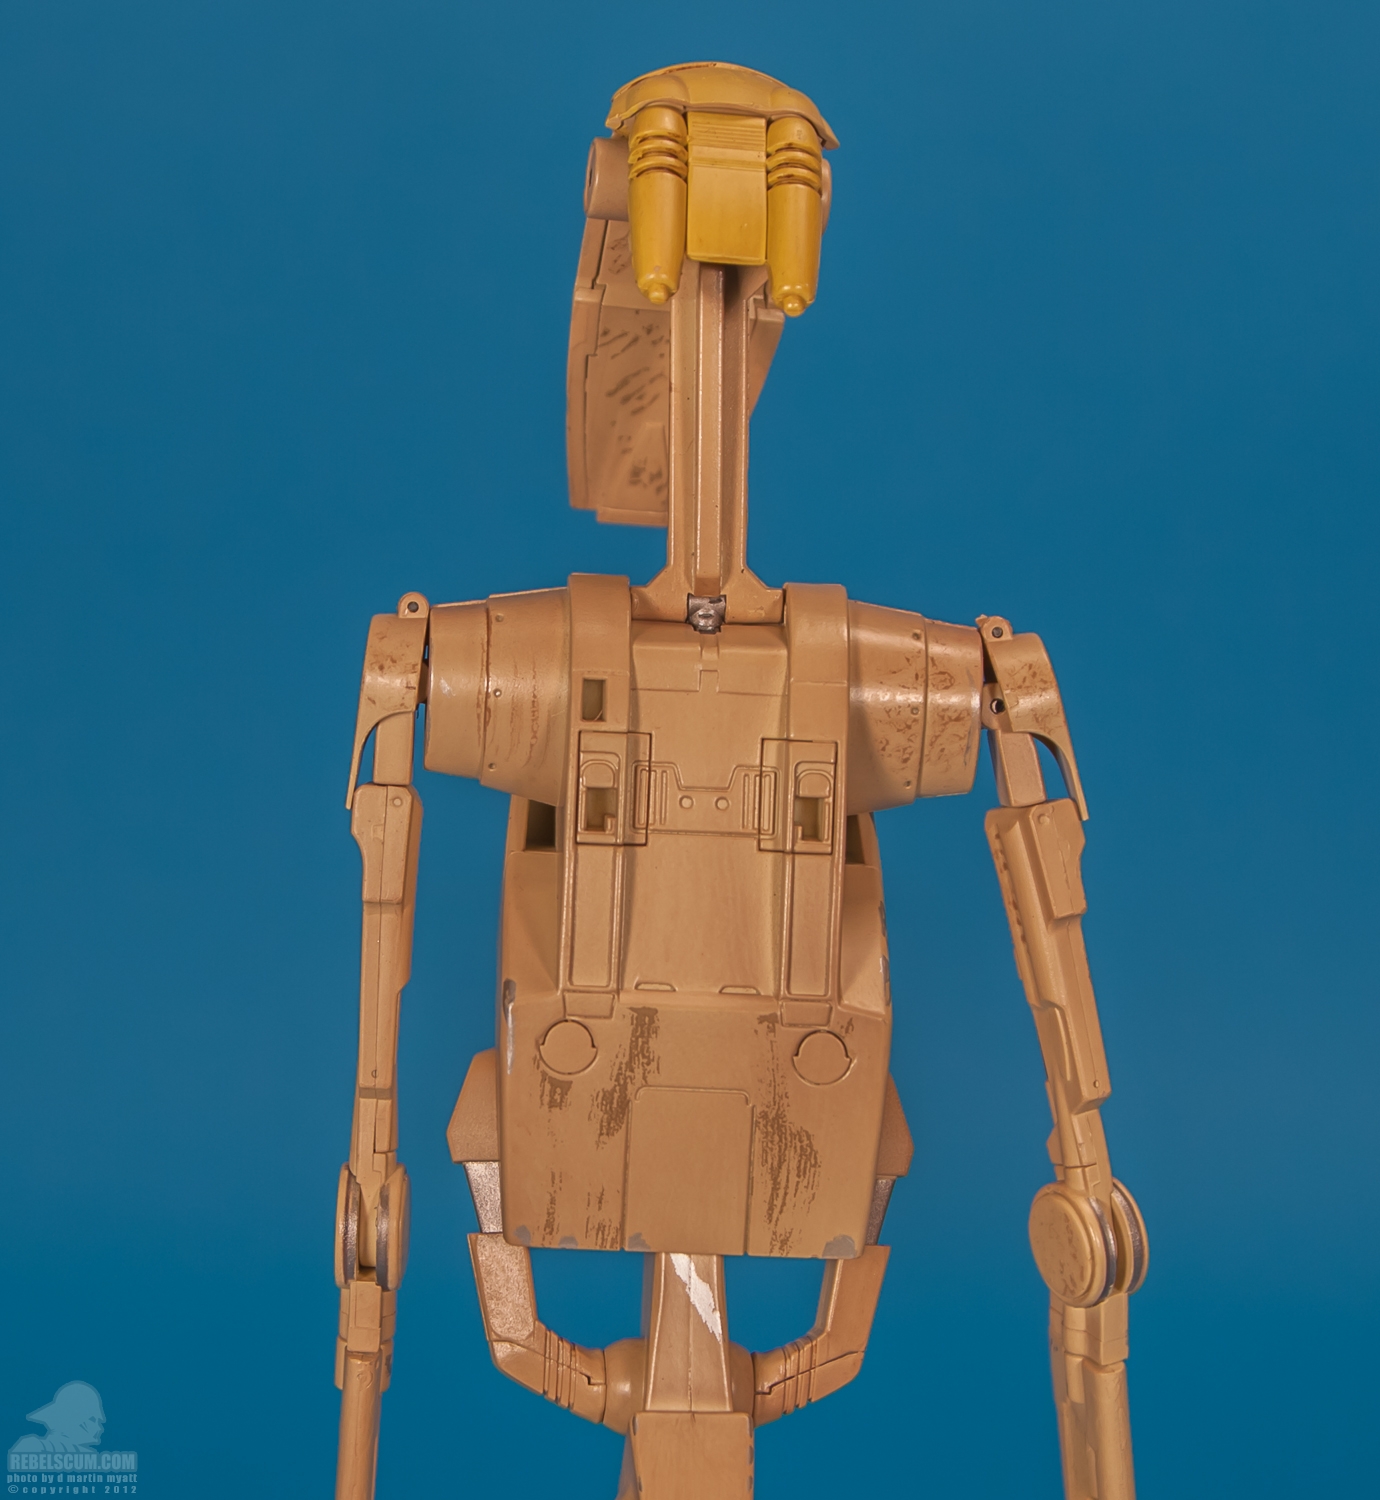 OOM-9_Battle_Droid_Commander_Sideshow_Collectibles-10.jpg